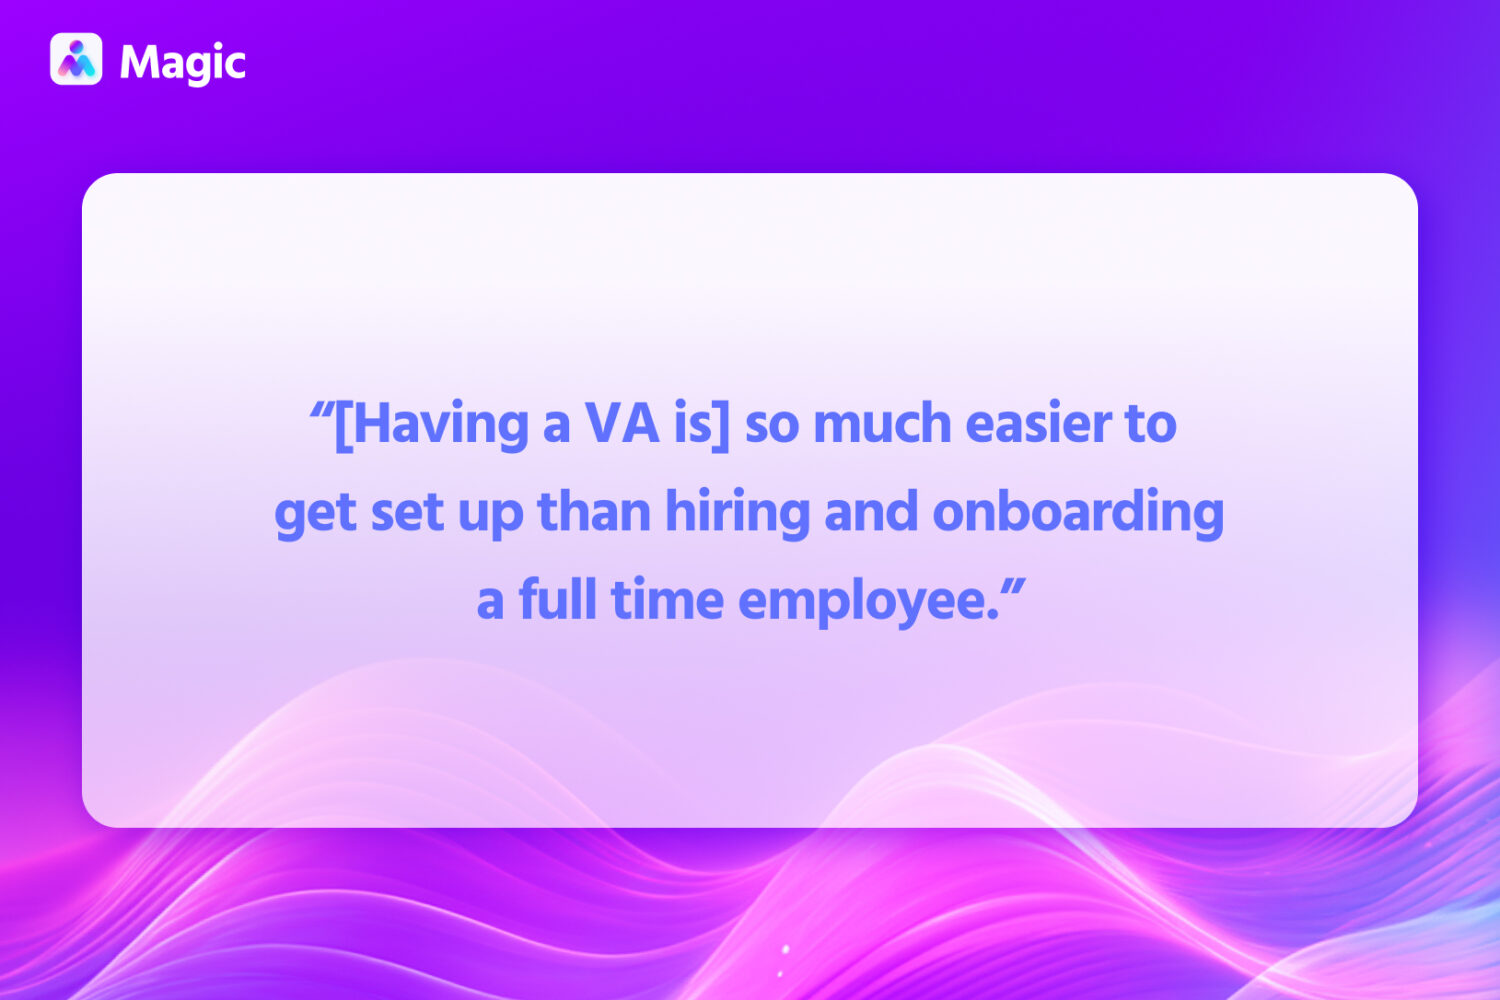 Quote about virtual assistants from Wicked+